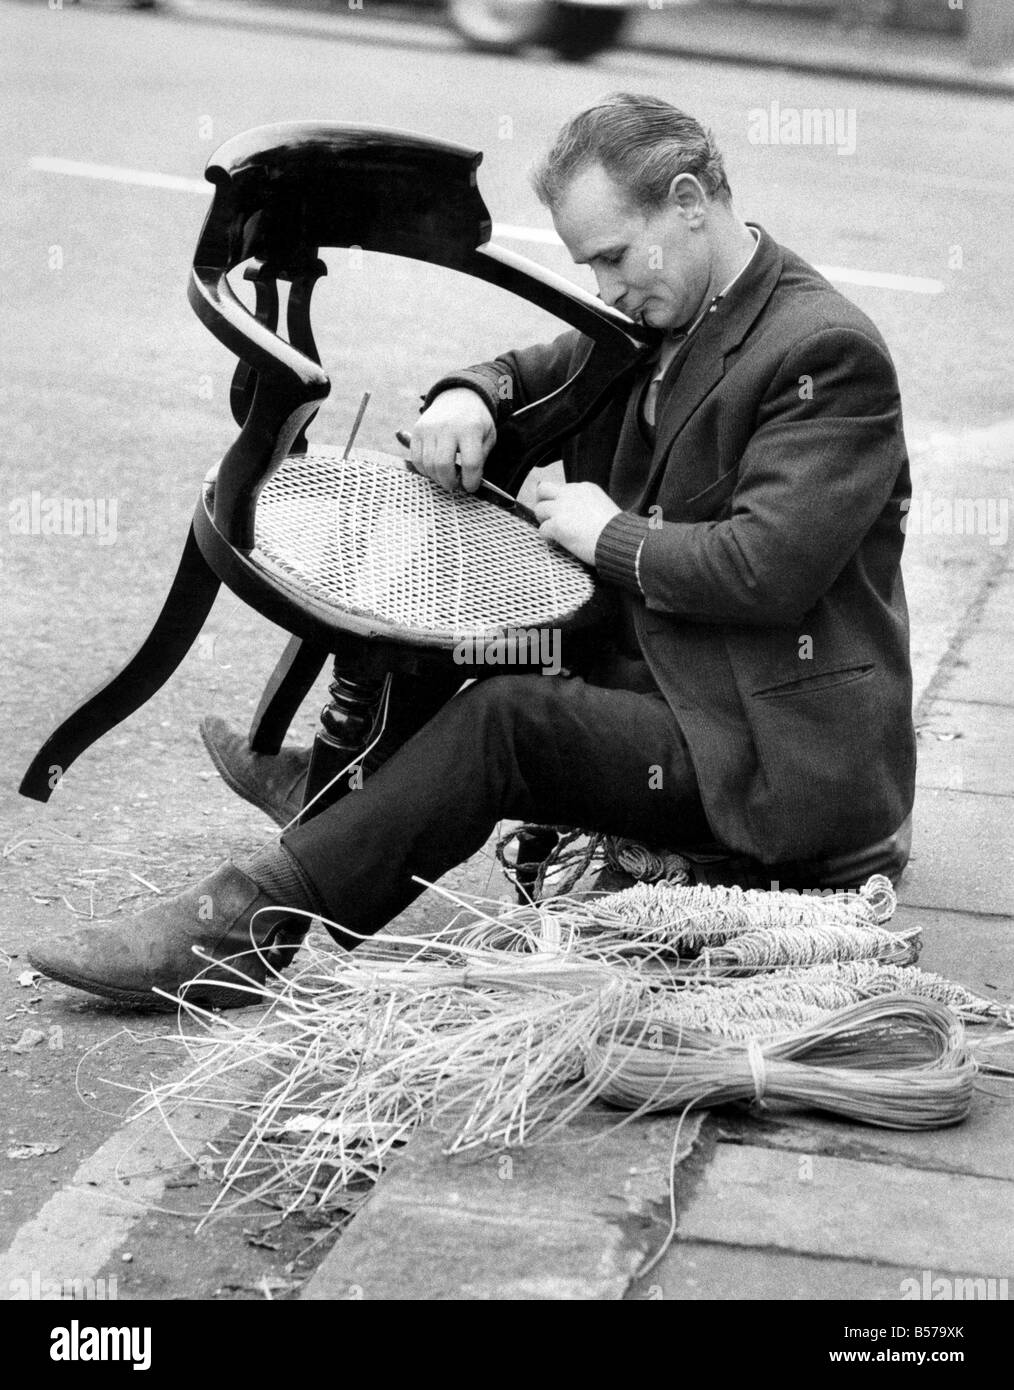 Chair Caning: An unusual sight in London the old craft of chair caning Mr. John Browning 38 year old from Battersea, repairing a cane chair, sitting on the edge of the pavement, on the corner of Ladbroke Grove. He learnt the craft from his 65 year old father-in-law who has been doing it all his life. He travels around London and gets work on recommendation. January 1971 P004943 Stock Photo